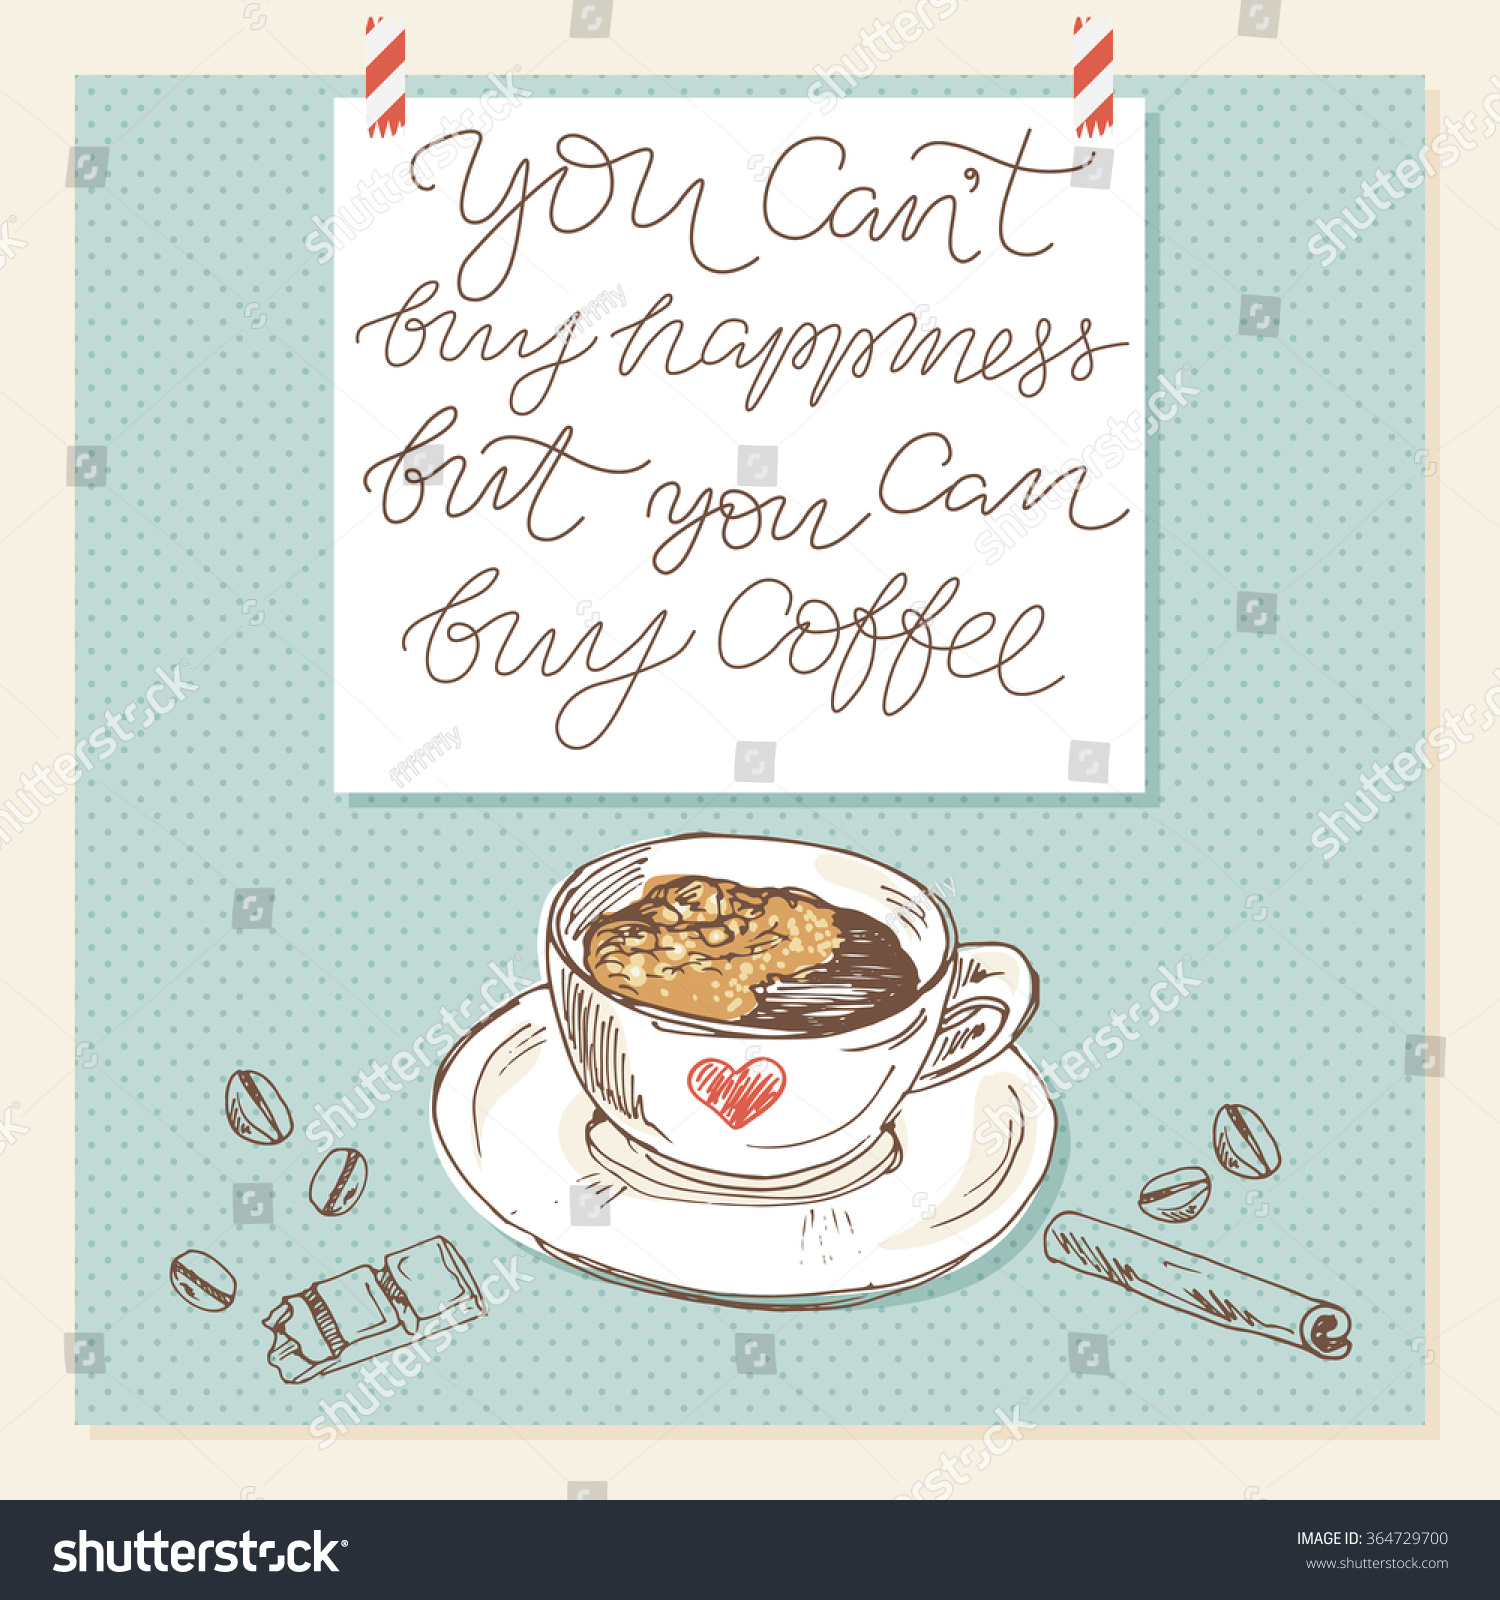 Coffee love poster with quote you can t happiness but you can